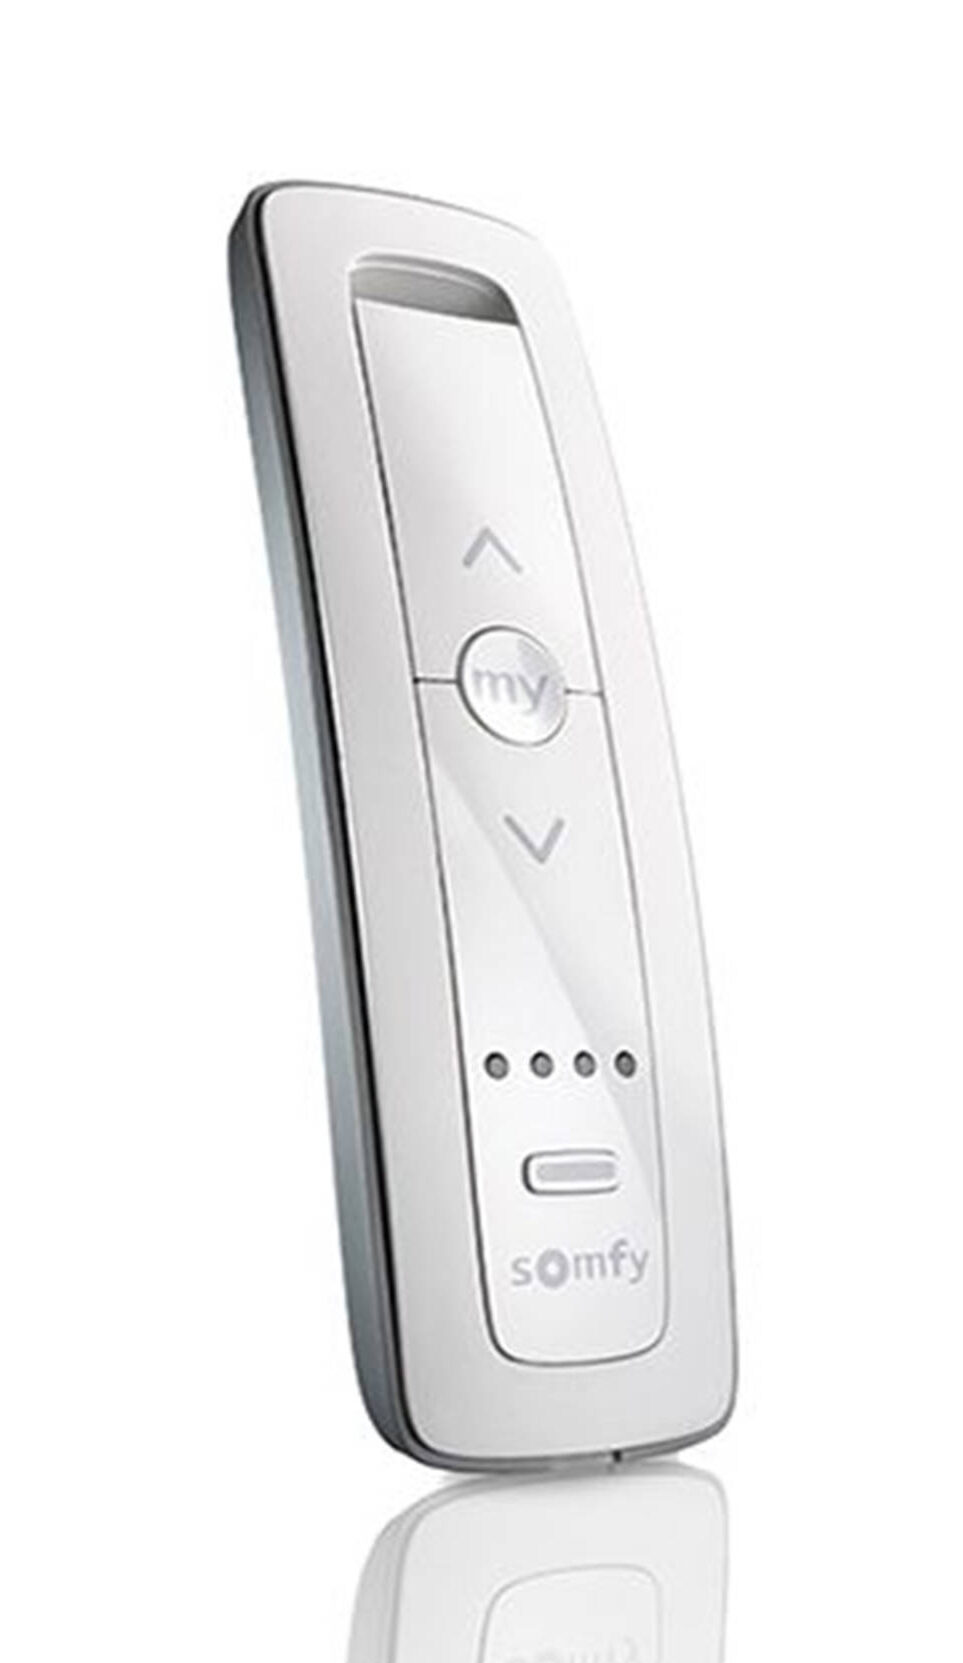 Somfy Situo 5 channel remote